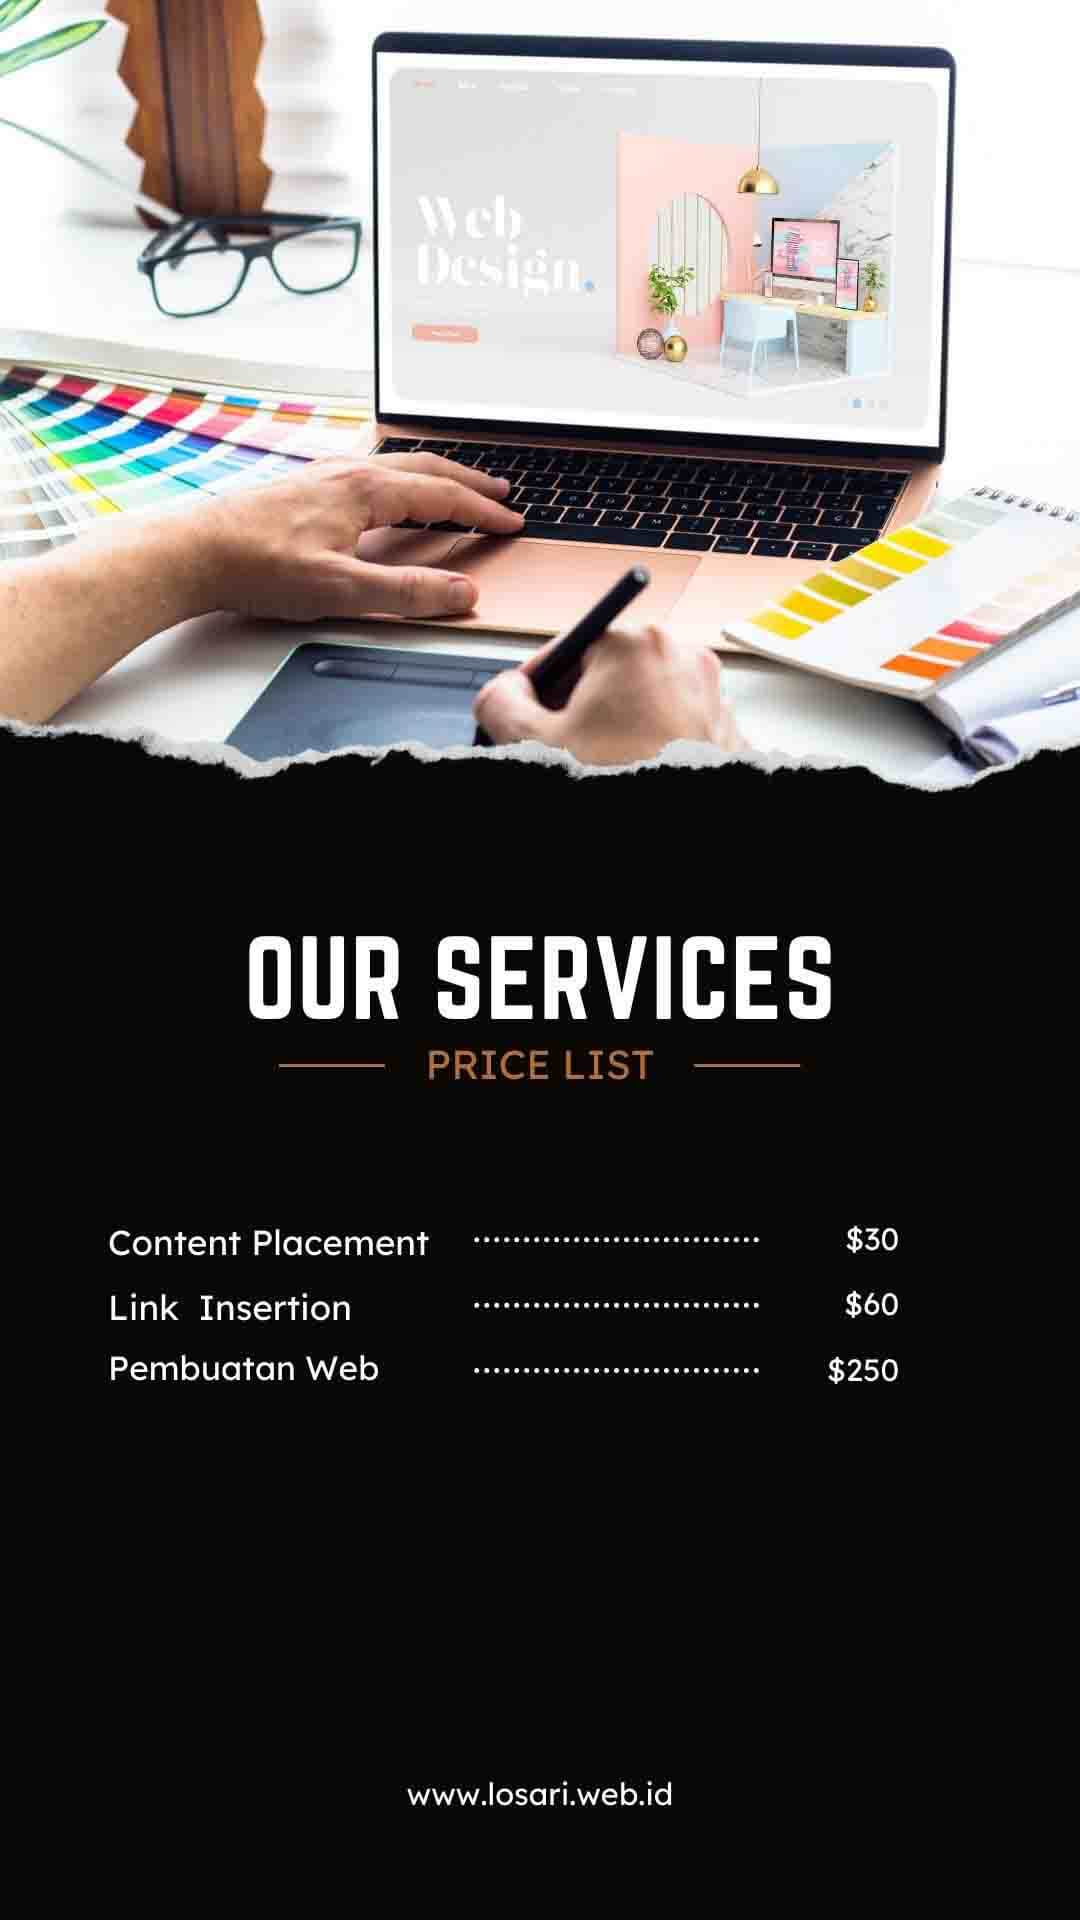 Our Services Price List